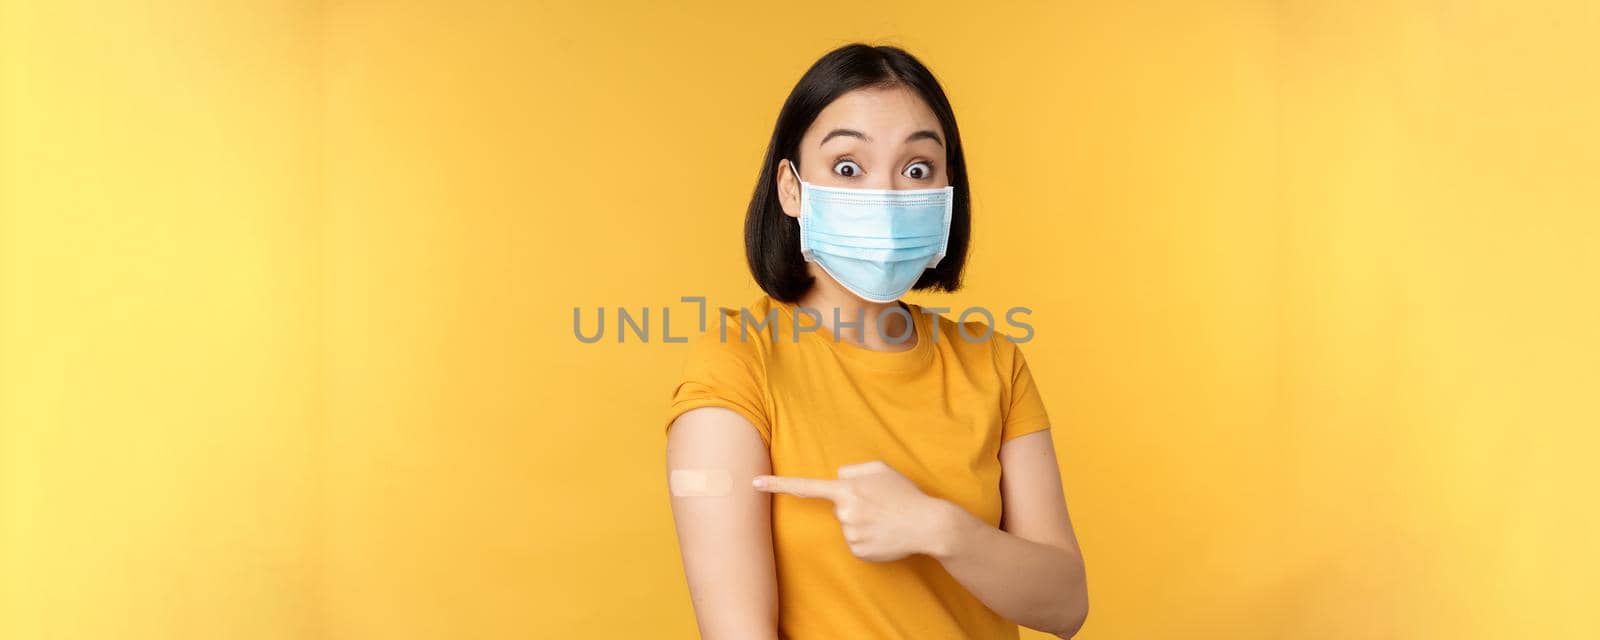 Vaccination from covid and health concept. Excited asian woman in medical face mask, pointing finger at shoulder with band aid, standing over yellow background.